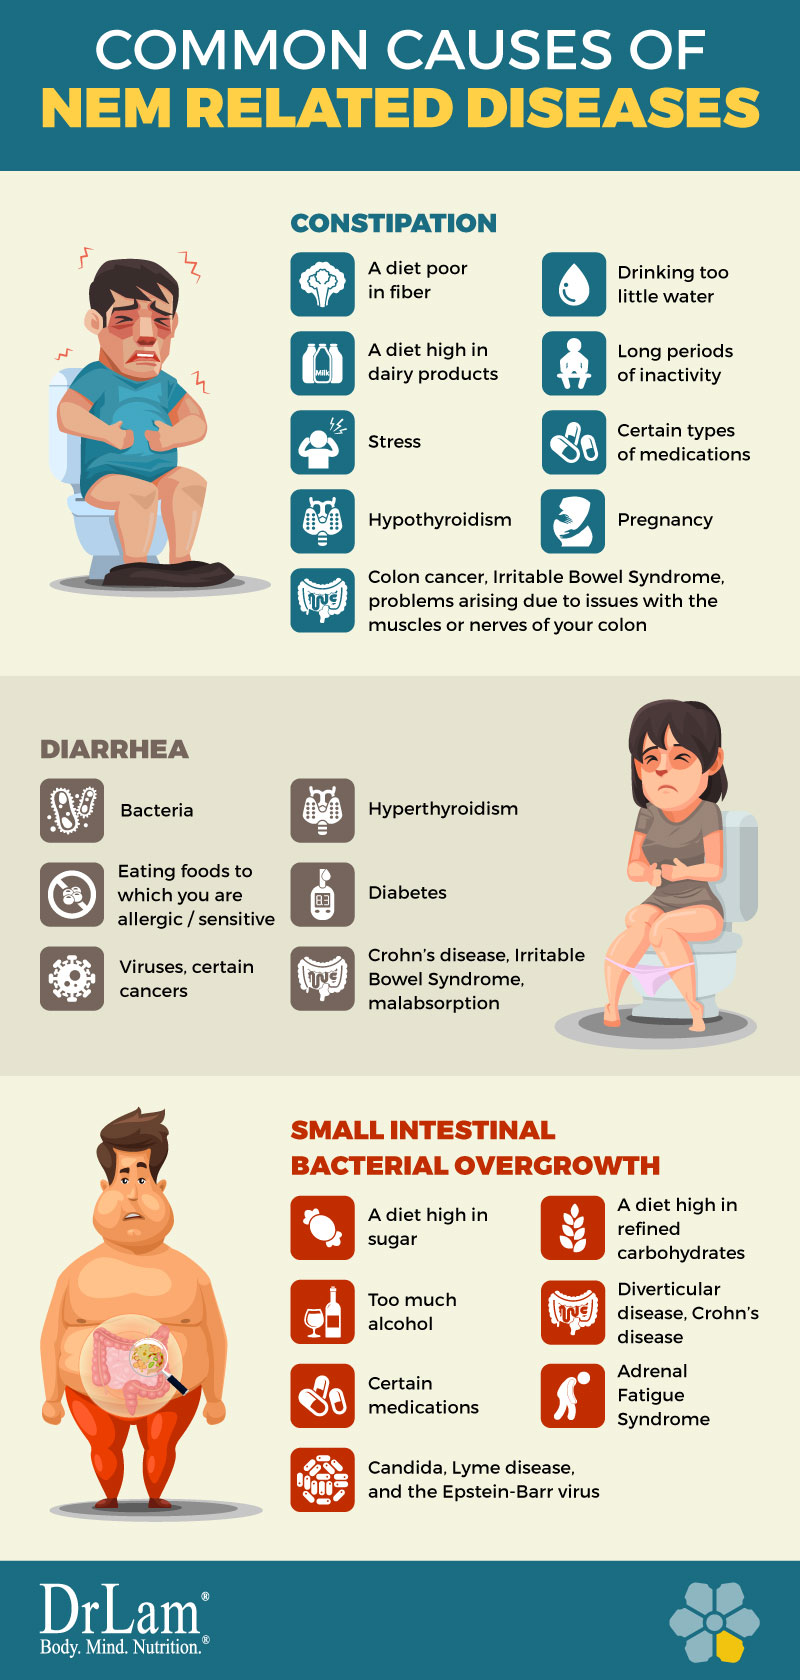 Check out this easy to understand infographic about the common causes of NEM related diseases